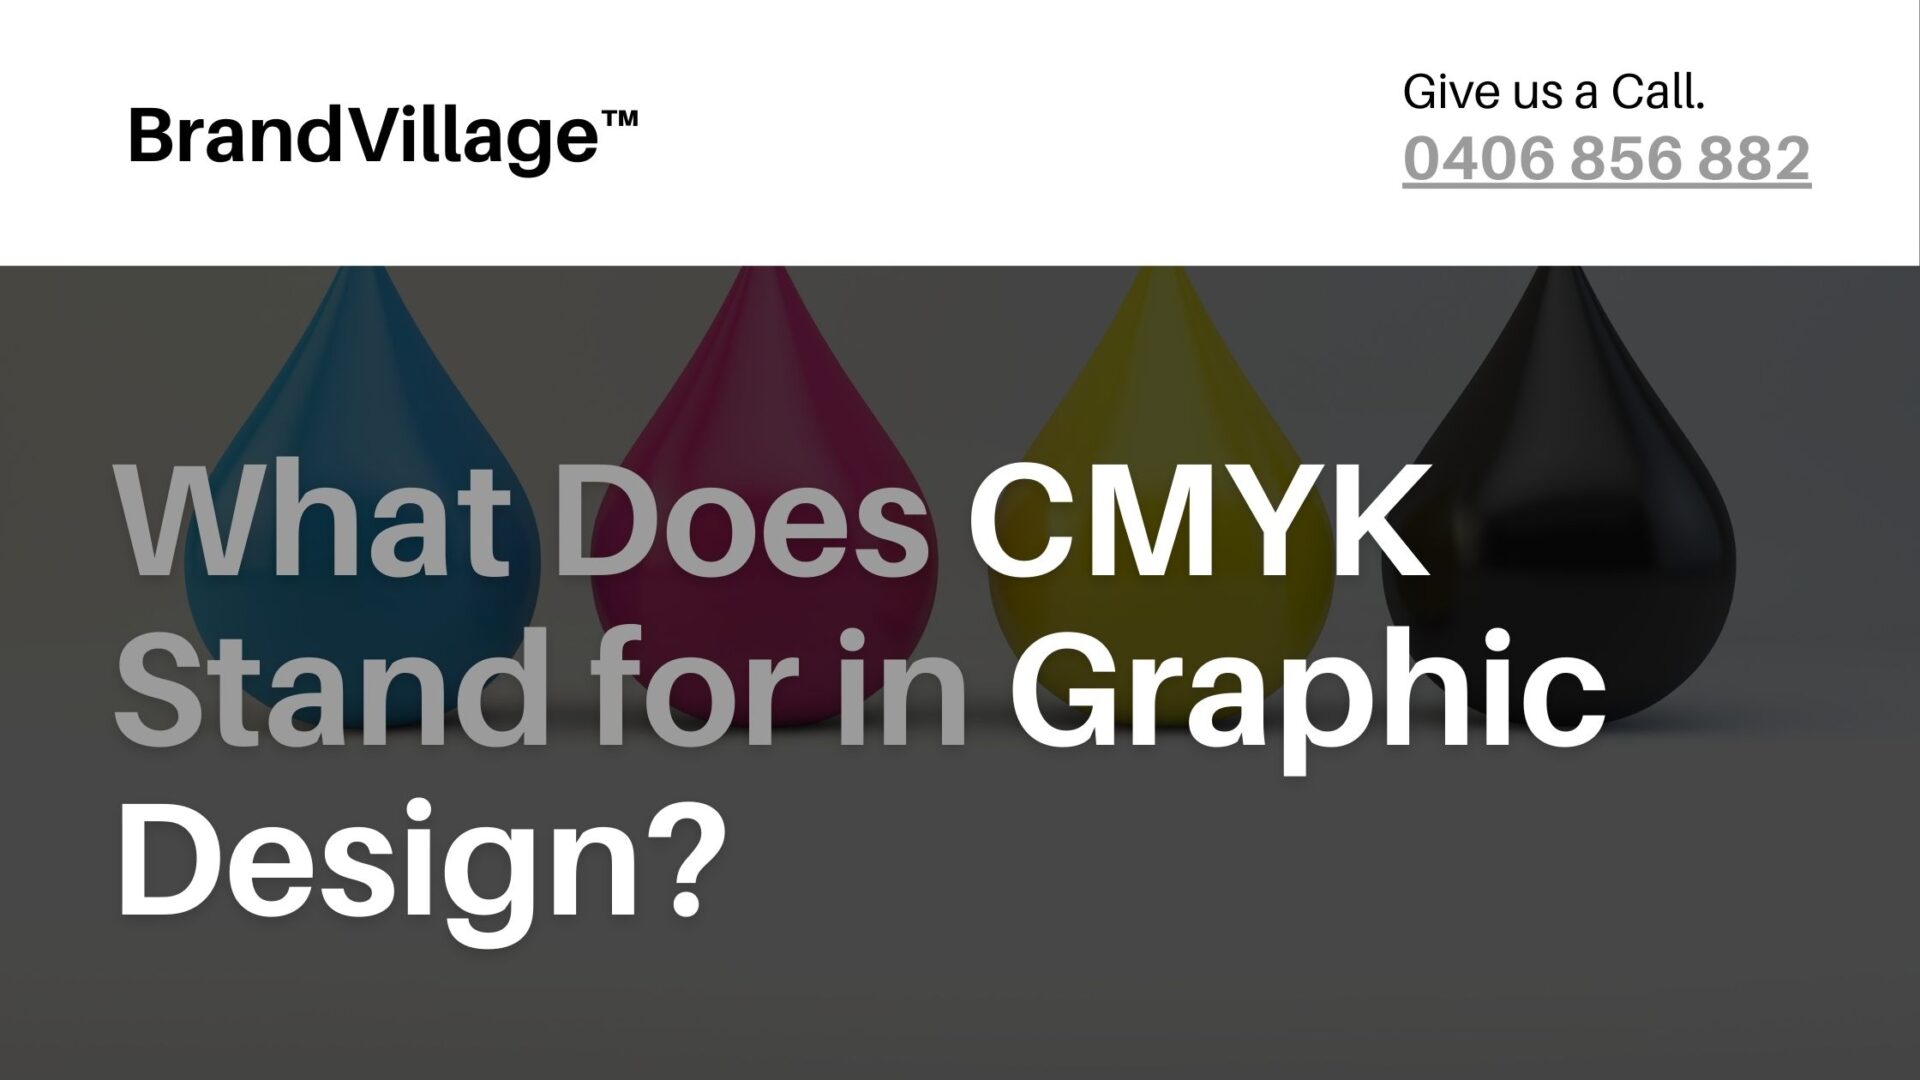 What Does CMYK Stand for in Graphic Design?